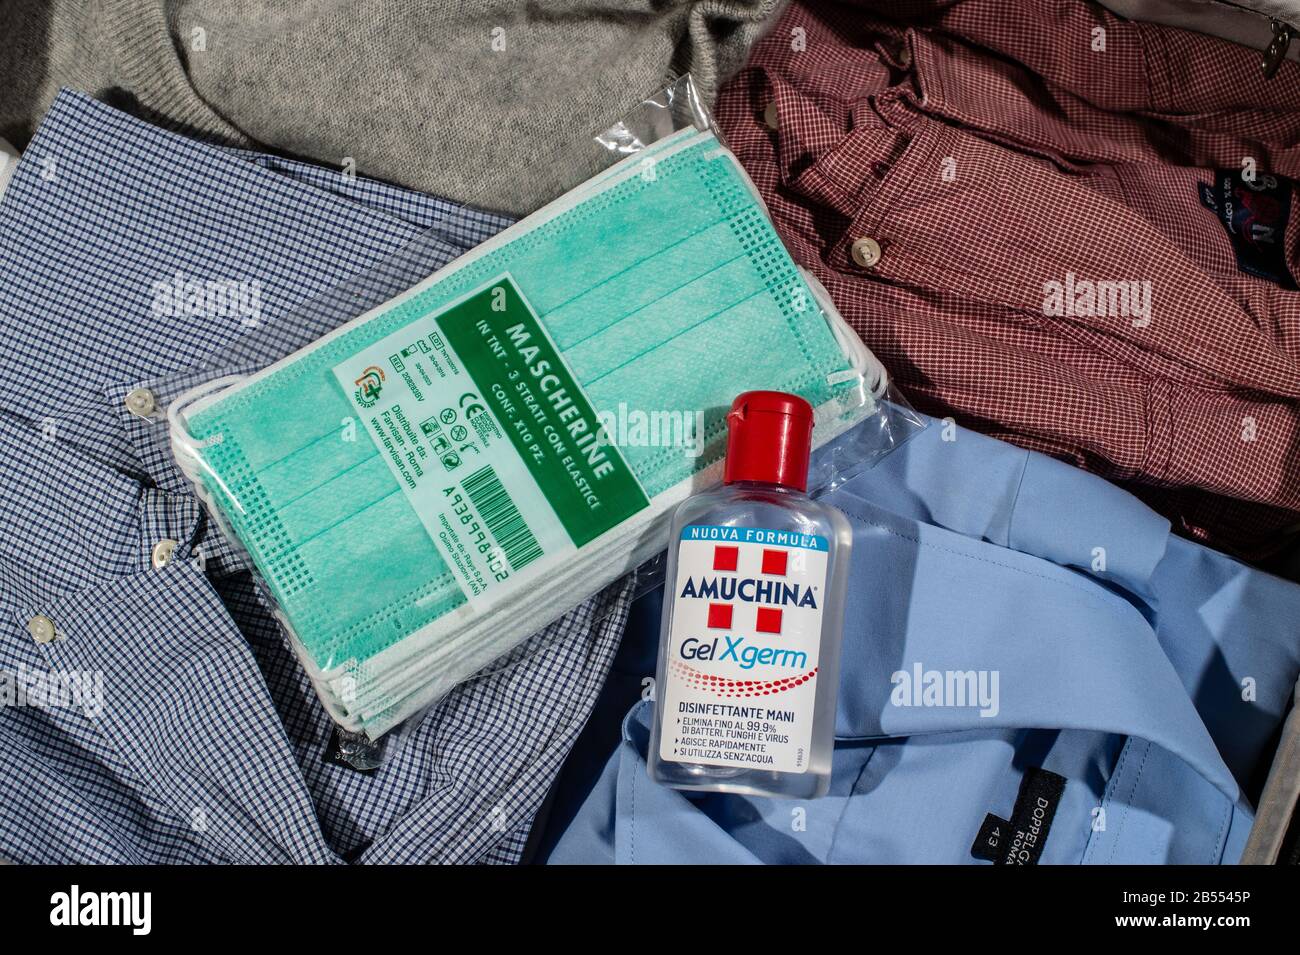 Protective masks and hand sanitizers have become indispensable for Italians who still travel, at least as much as their passport. Both are difficult to find due to the huge demand caused by the expansion of the Coronavirus epidemic in the country. Stock Photo